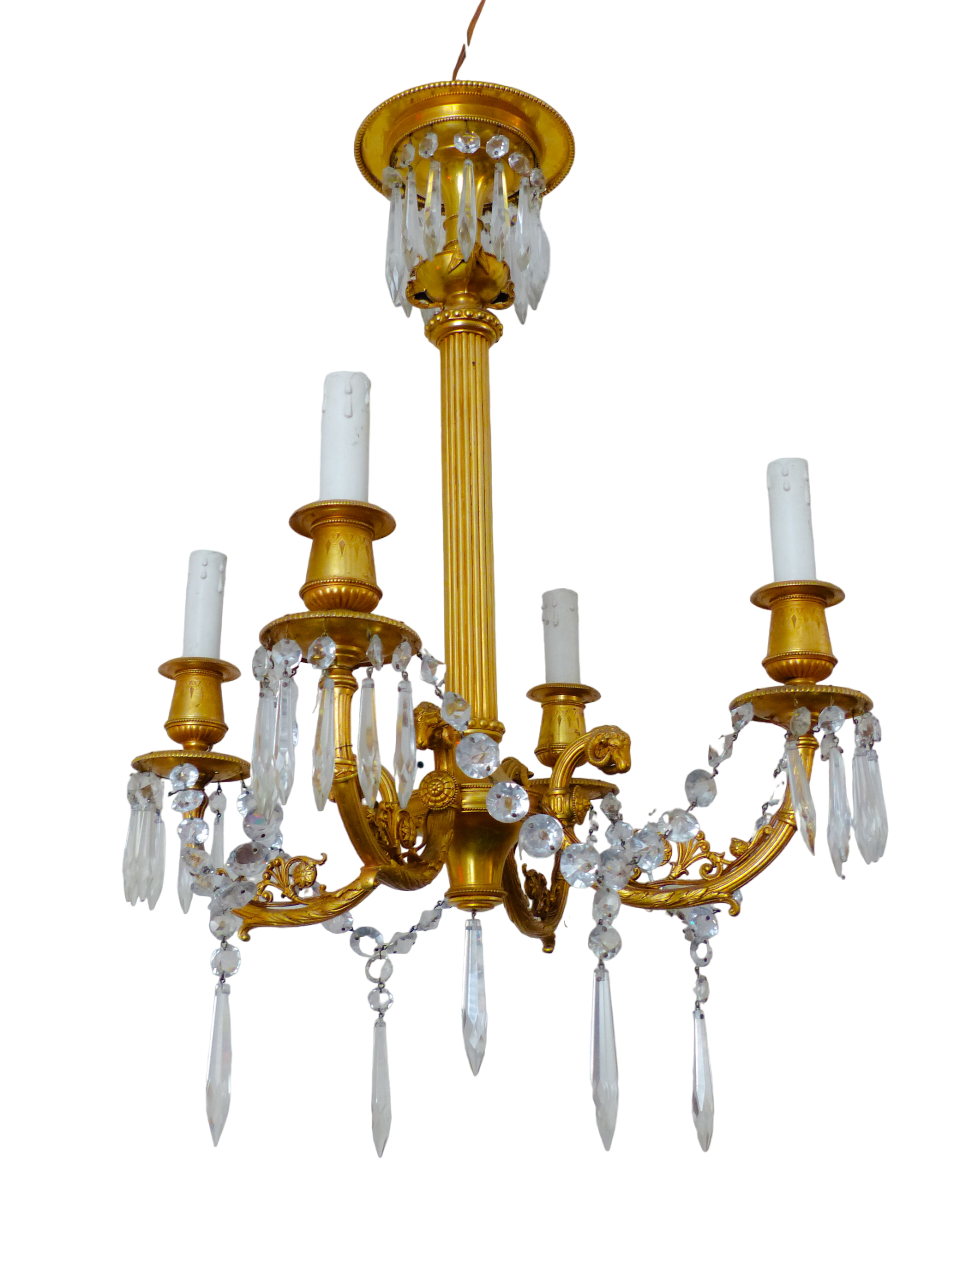 19TH Antique French 4 Arms Ormolu Bronze Chandelier with Rams Crystal Ceiling